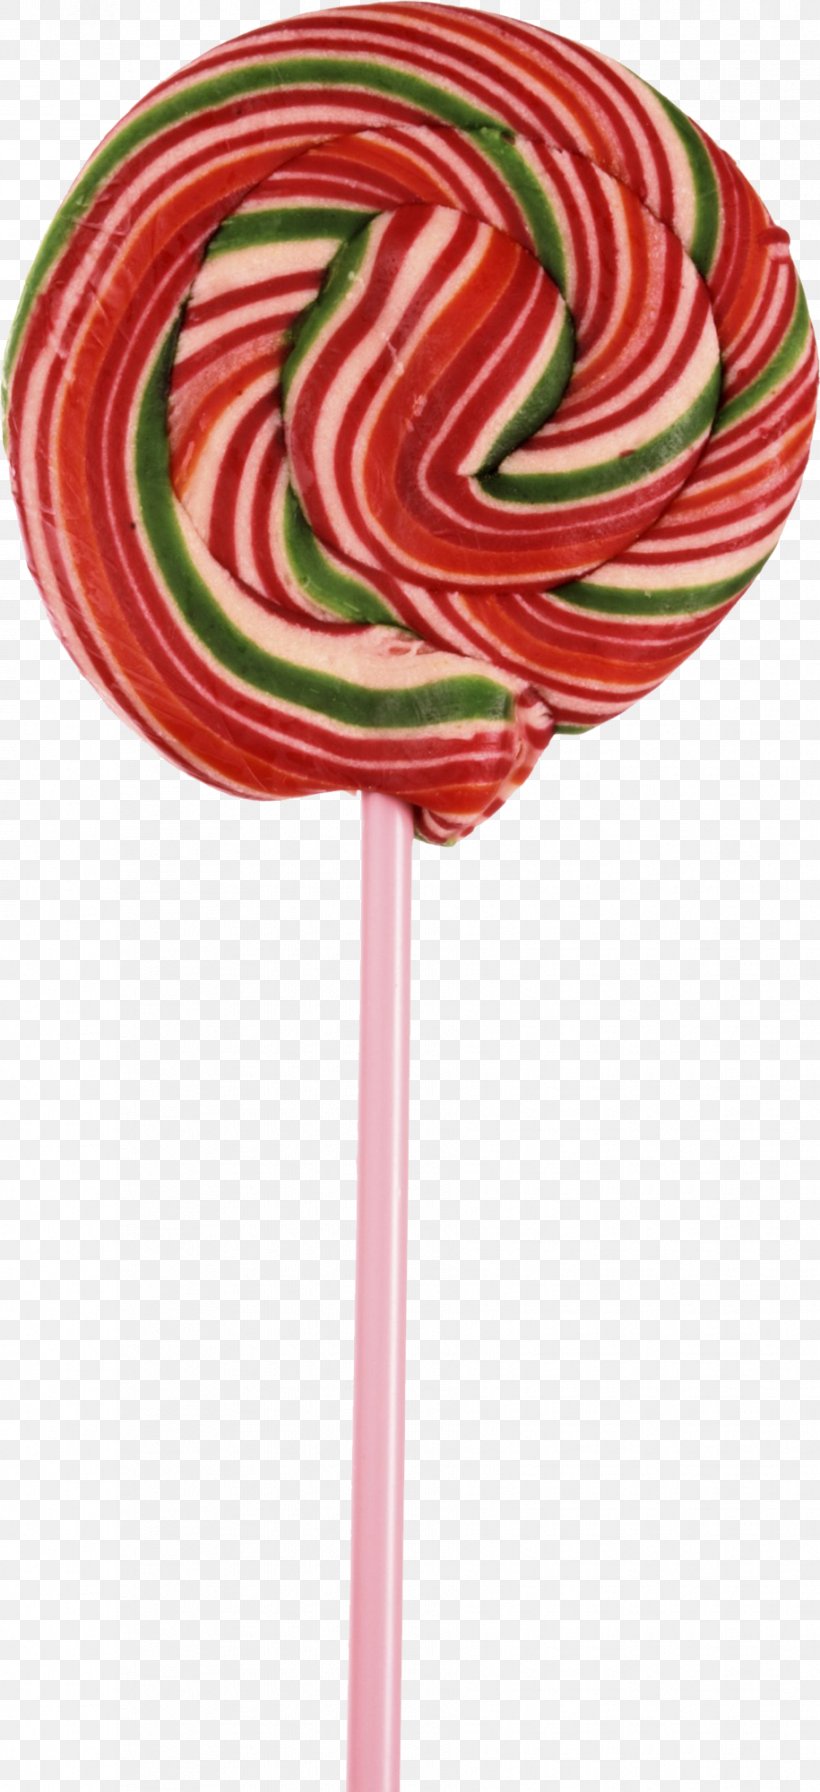 Lollipop Clip Art, PNG, 915x2000px, Lollipop, Button, Candy, Chupa Chups, Confectionery Download Free